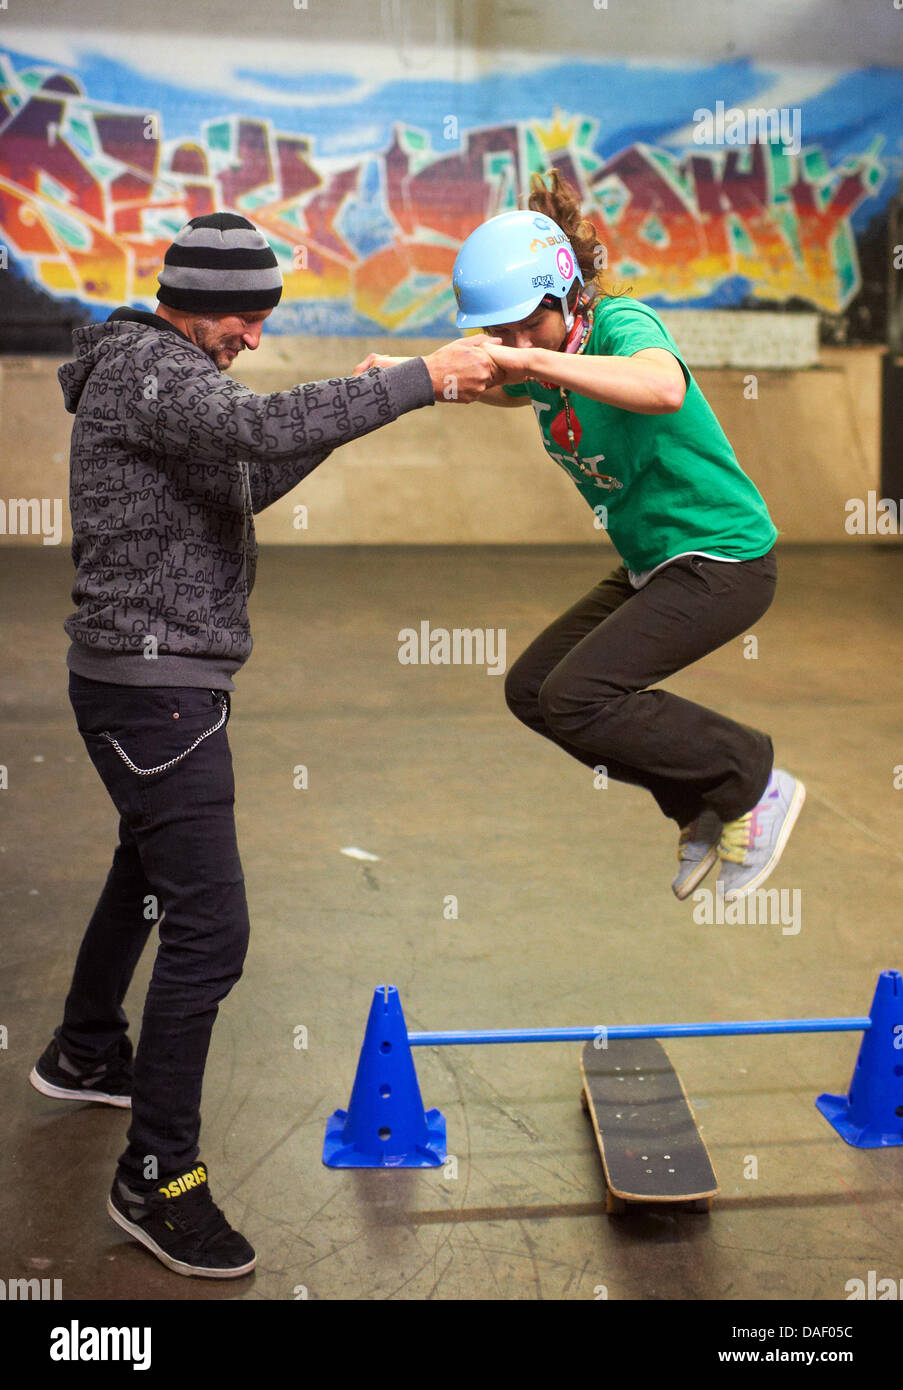 Germany's skateboard pionier Eberhard "Titus" Dittmann (L) practices a  trick with trainee teacher Lilly Uebele in his "Skater's Palace" in  Muenster, Germany, 22 November 2011. Dittmann brought the sport fad  skateboarding to